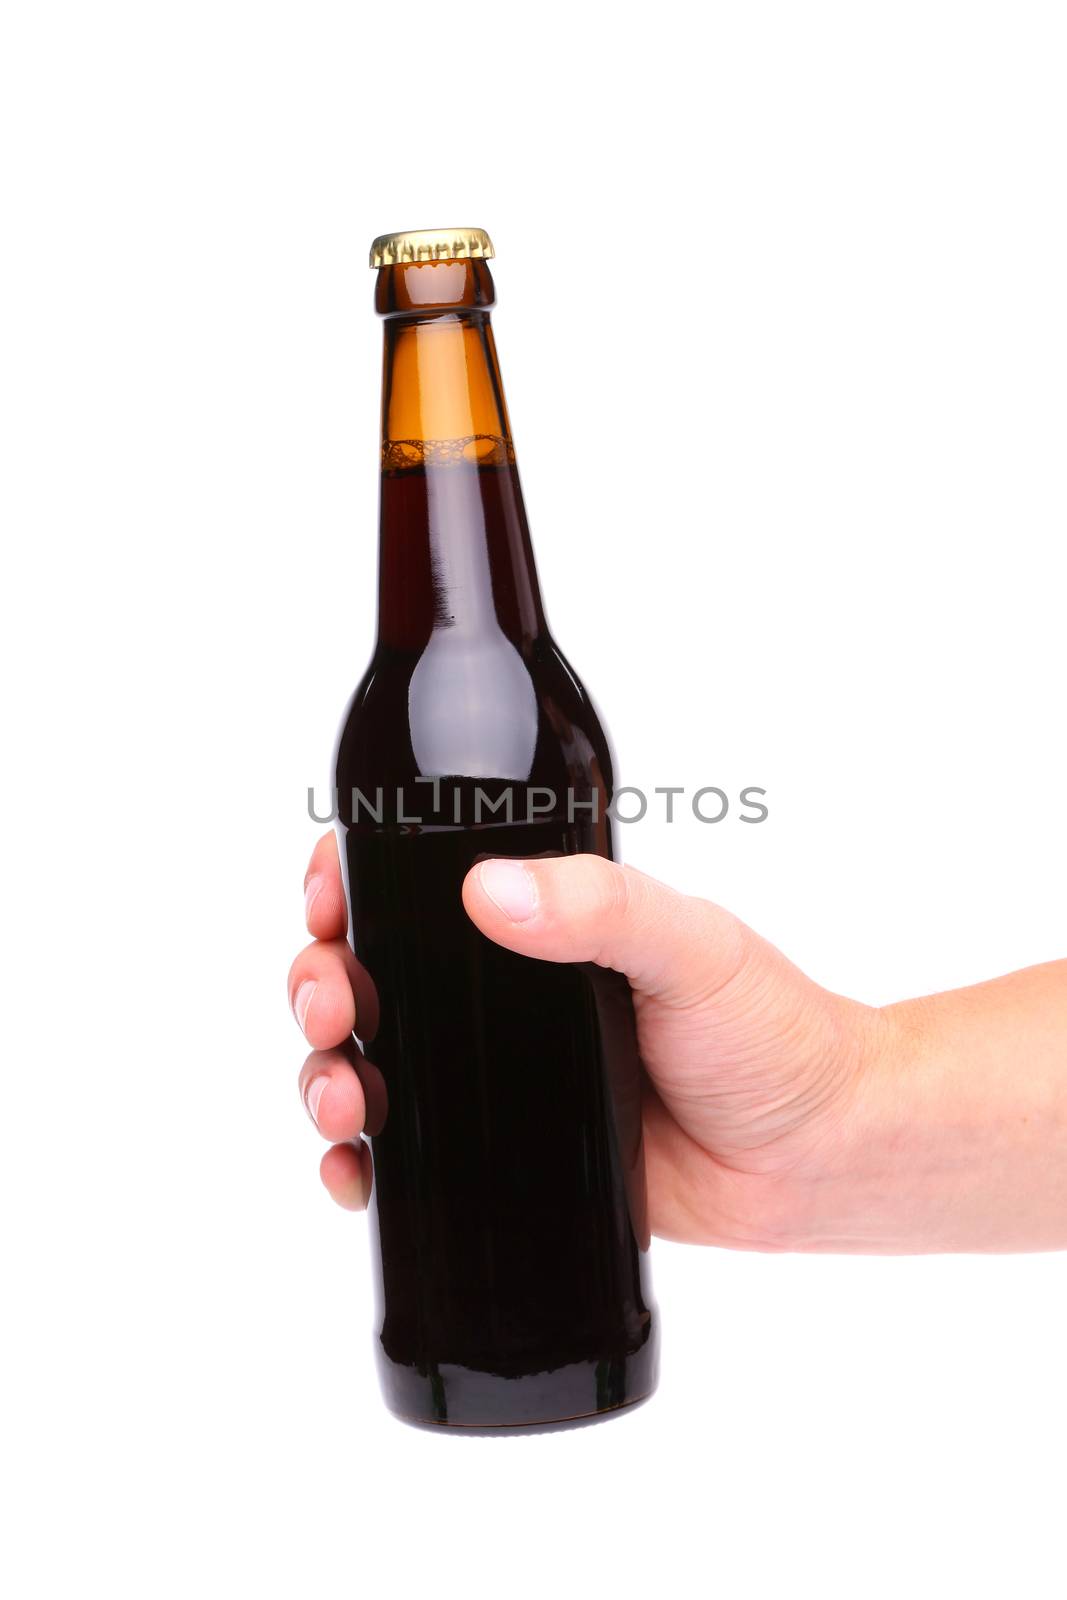 A hand holding up a brown beer bottle by indigolotos